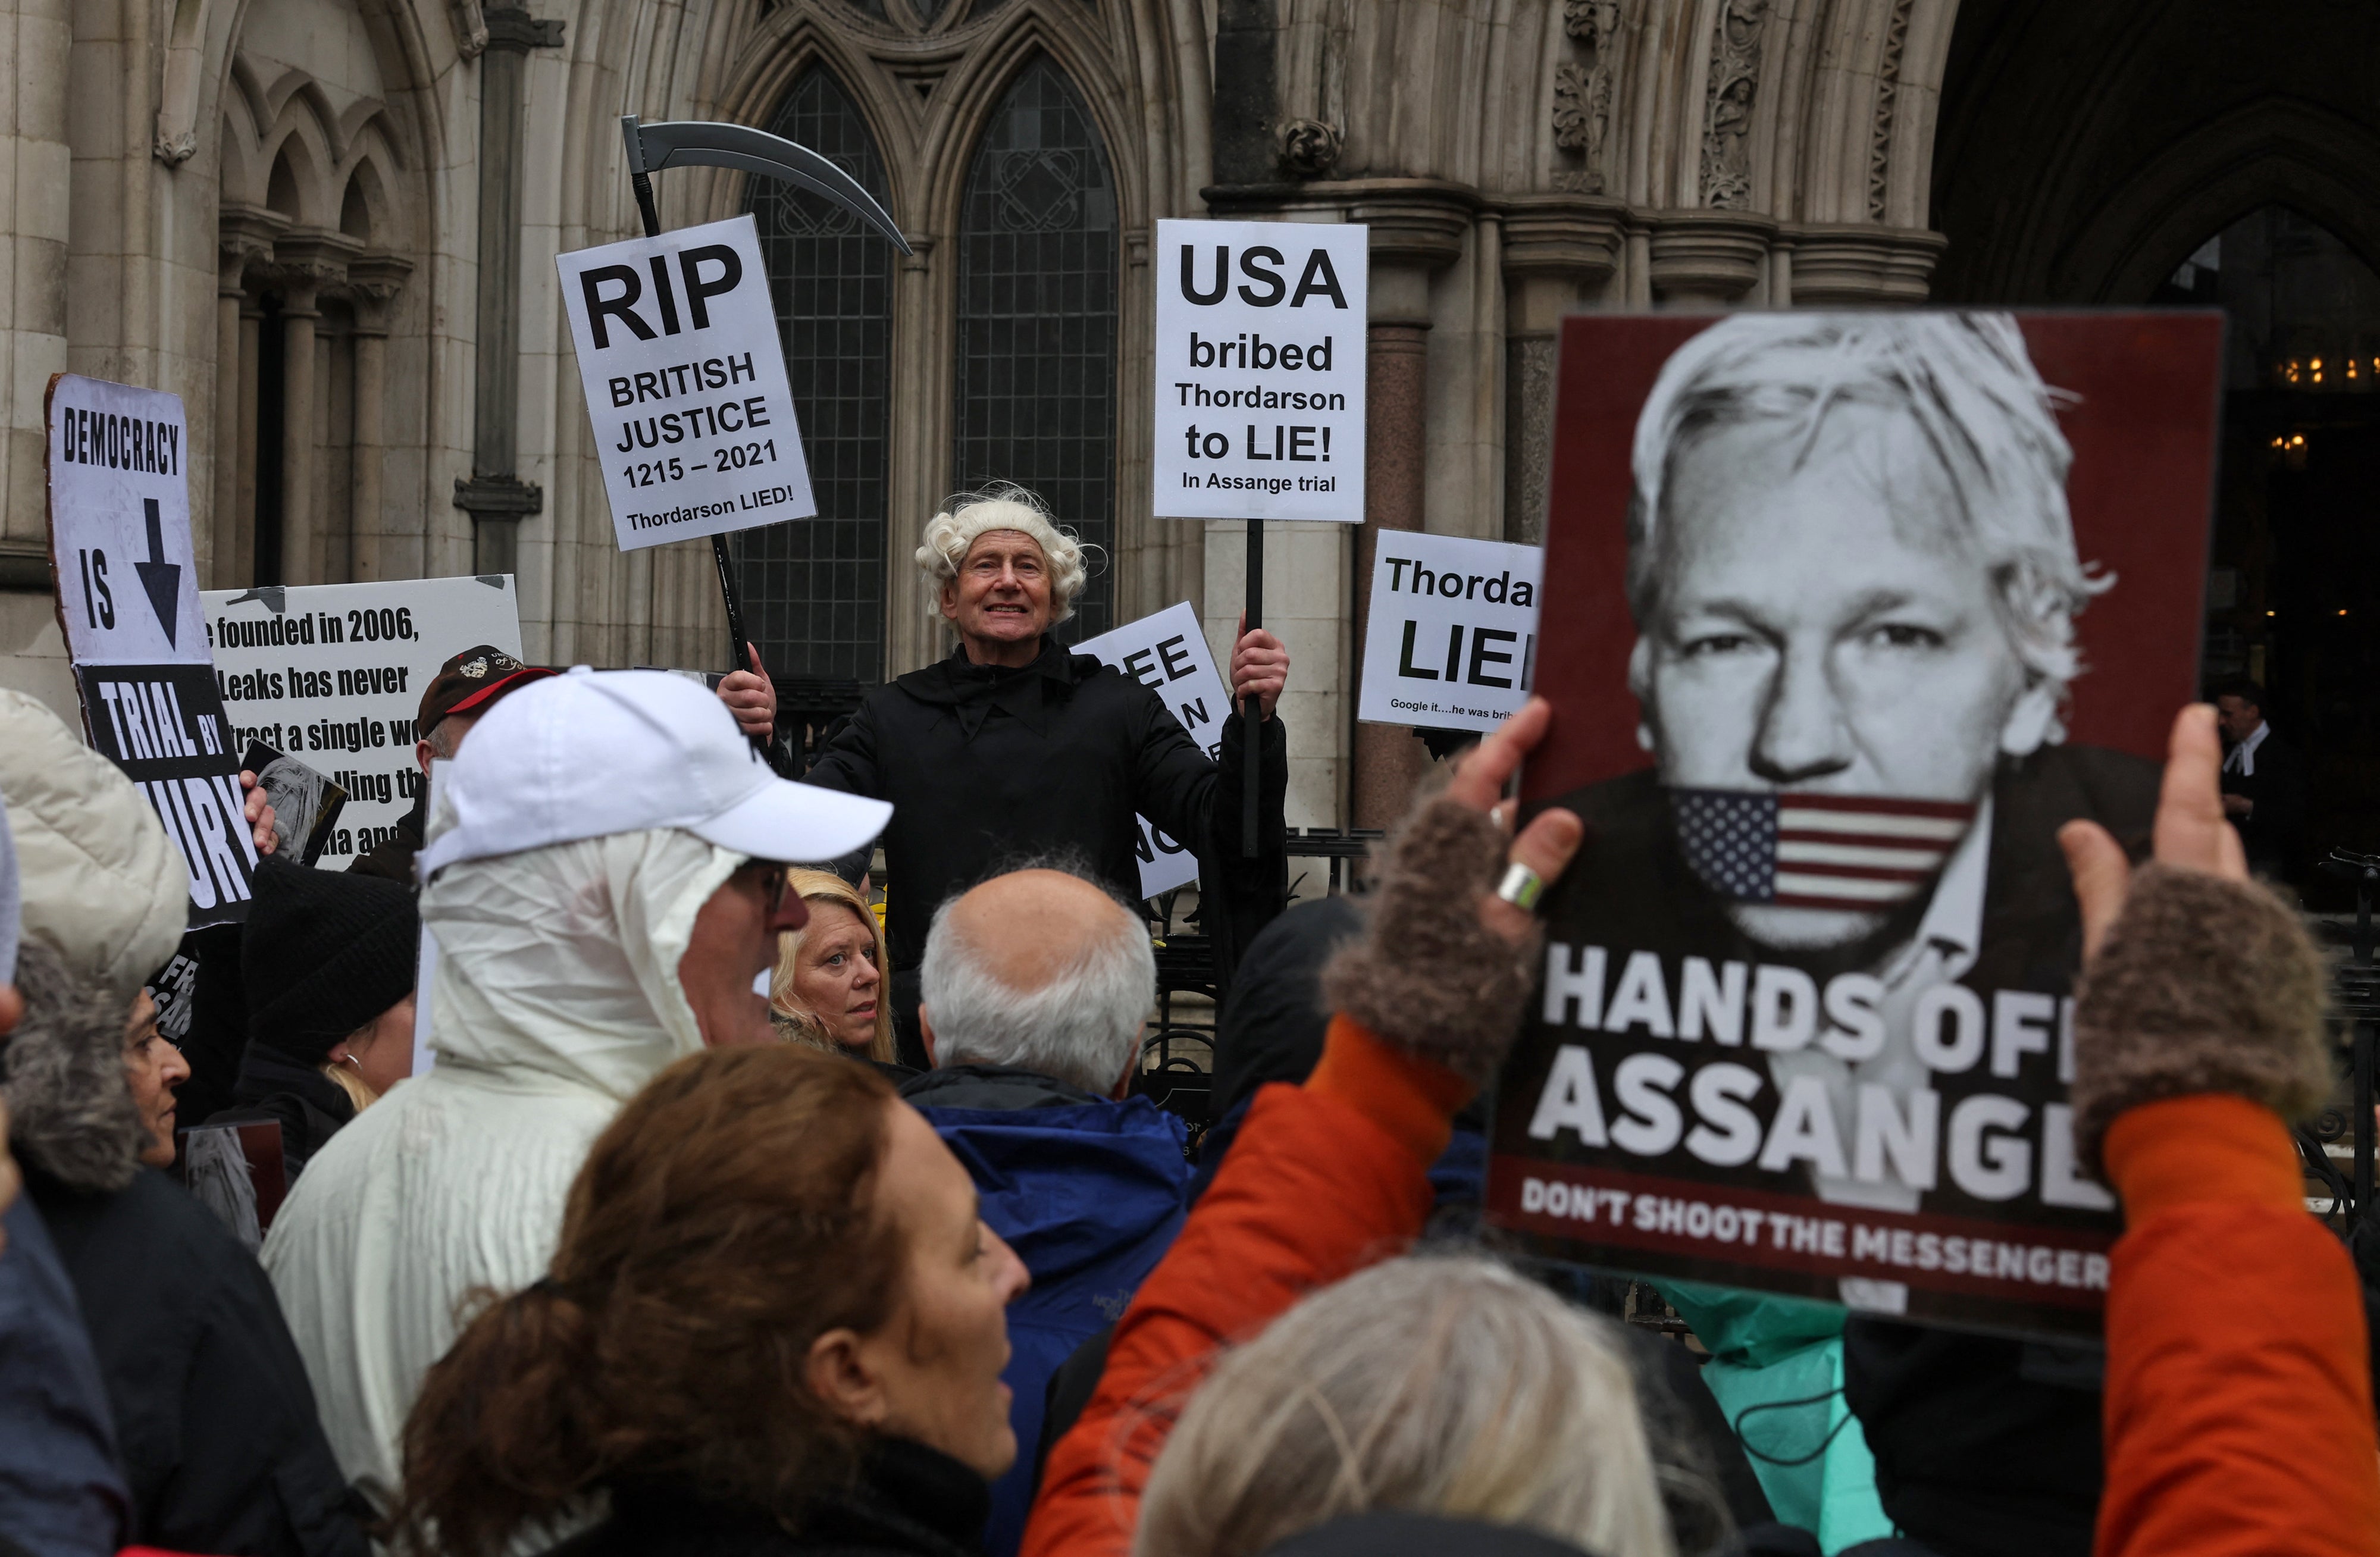 Demonstrators protested outside of the Royal Courts of Justice as the hearing took place on Wednesday